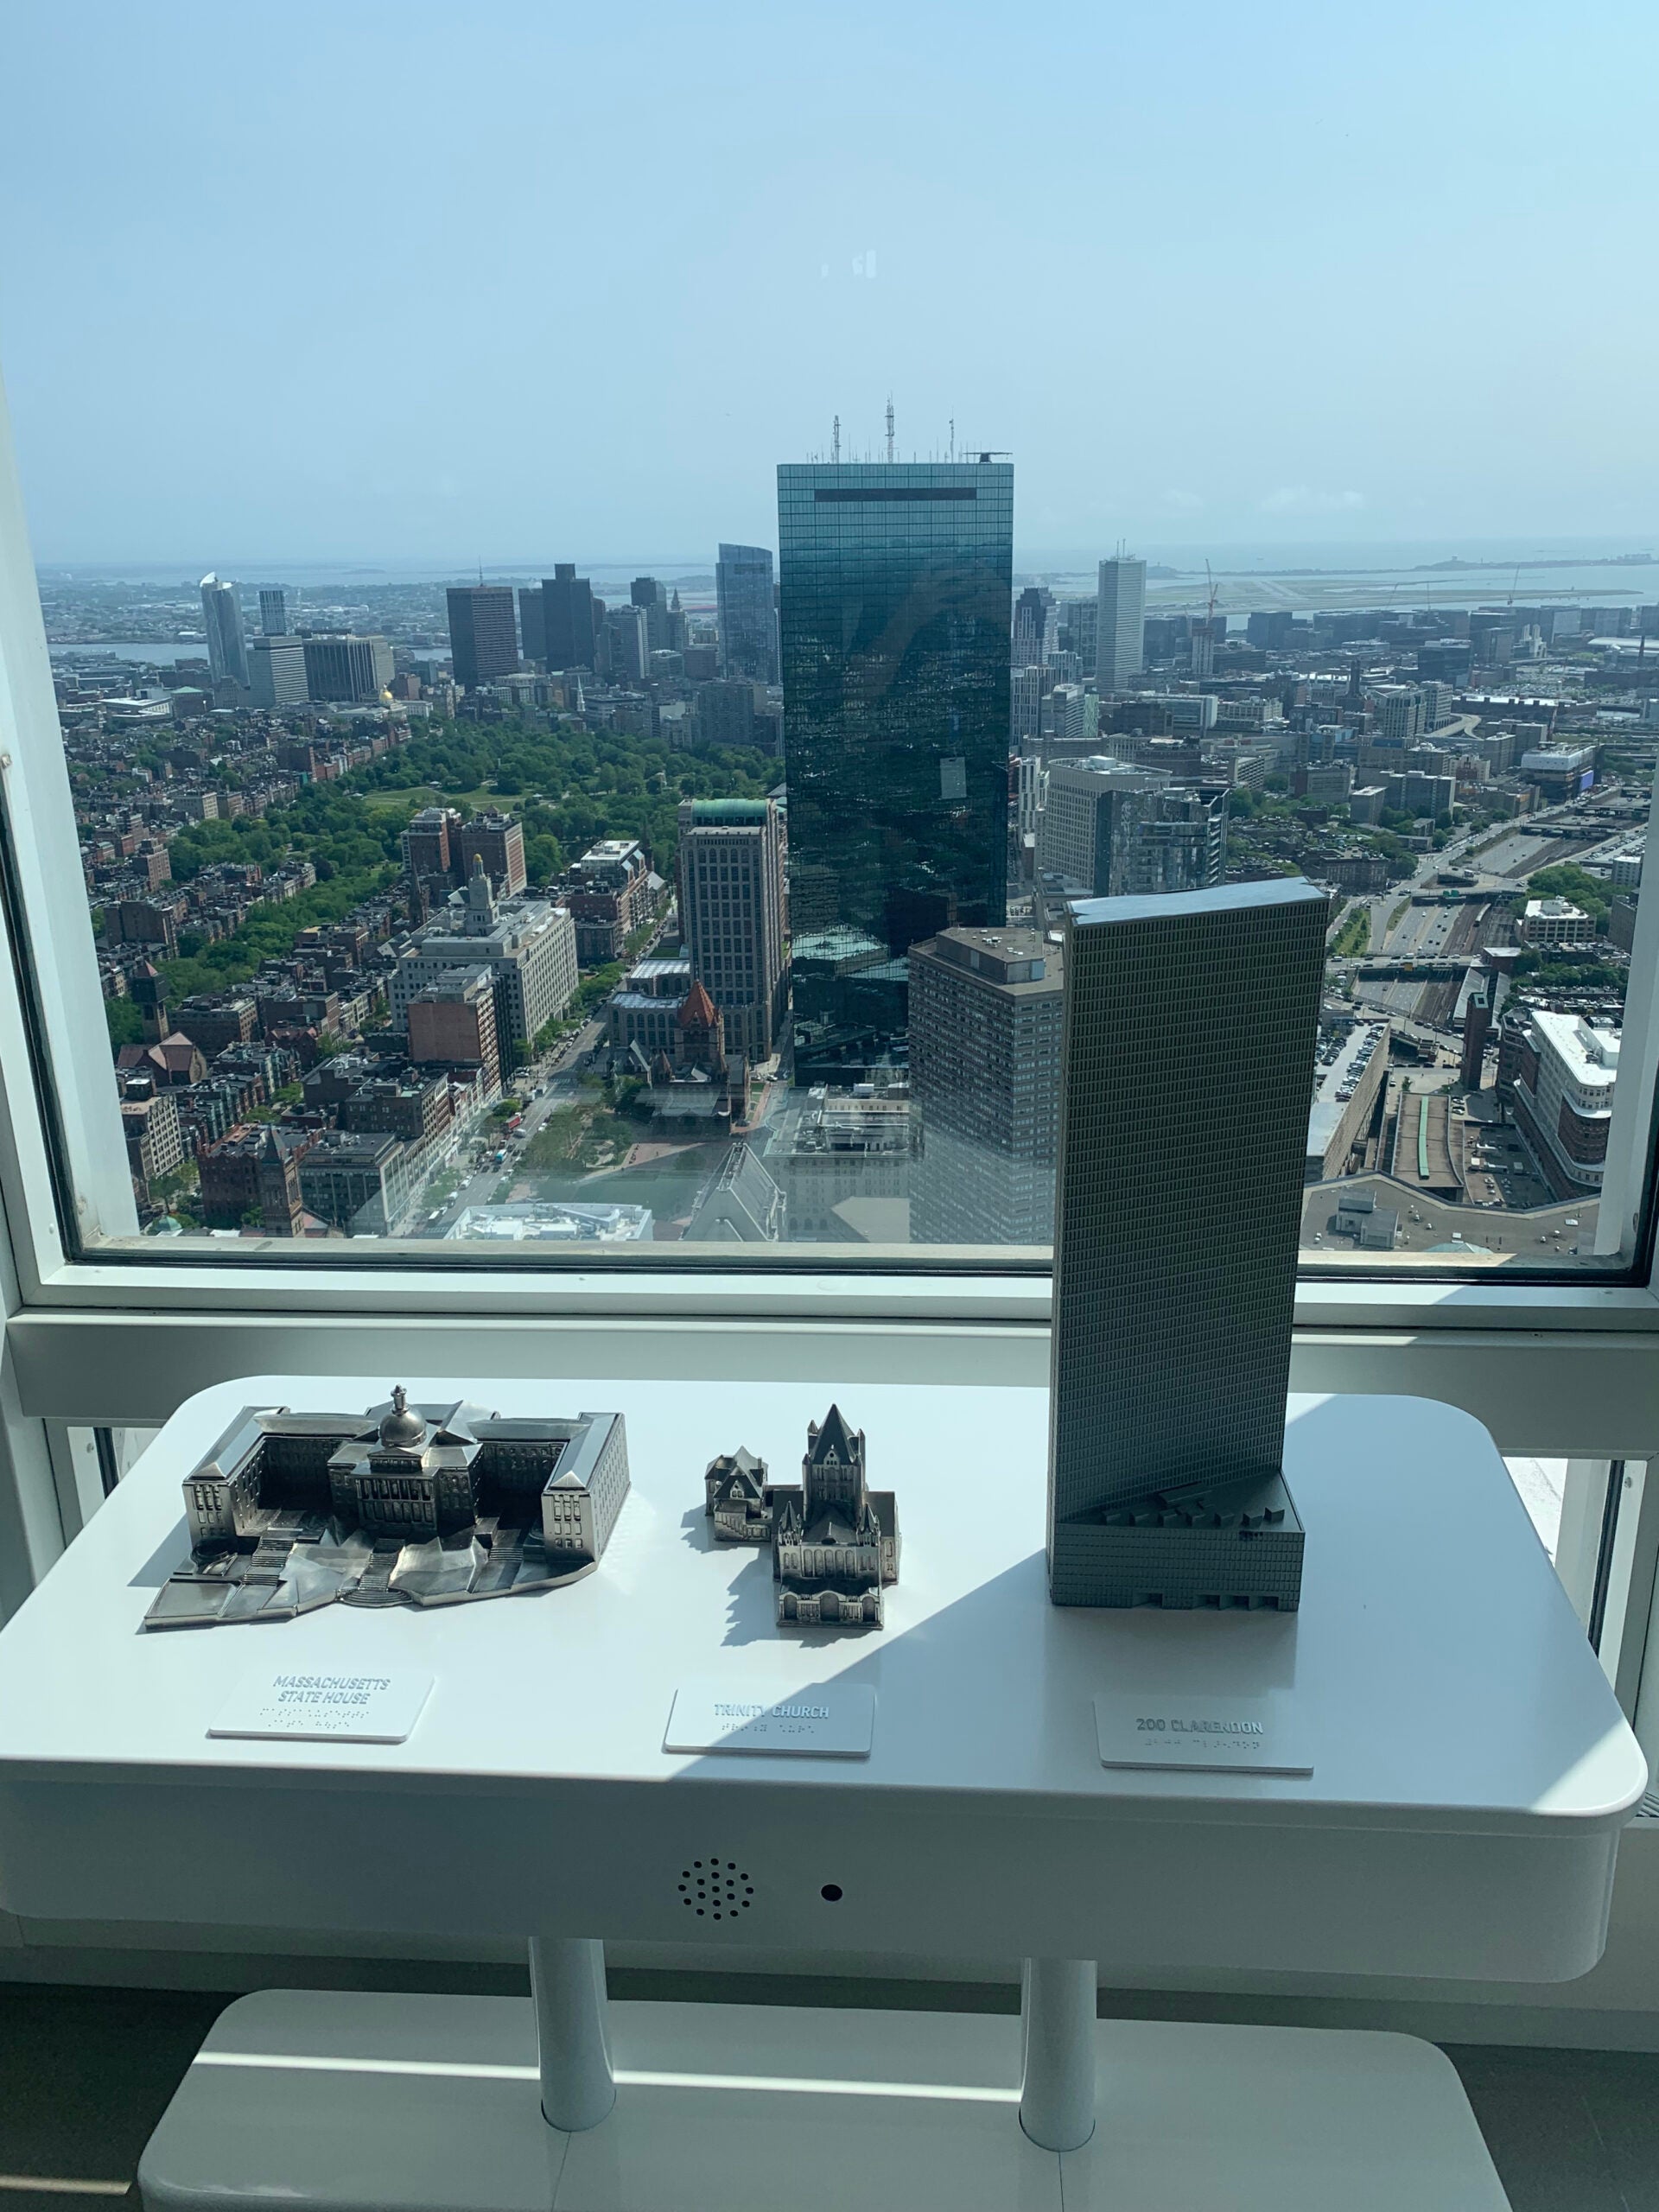 At View Boston, metal sculptures of Boston landmarks were created for those with visual impairments.